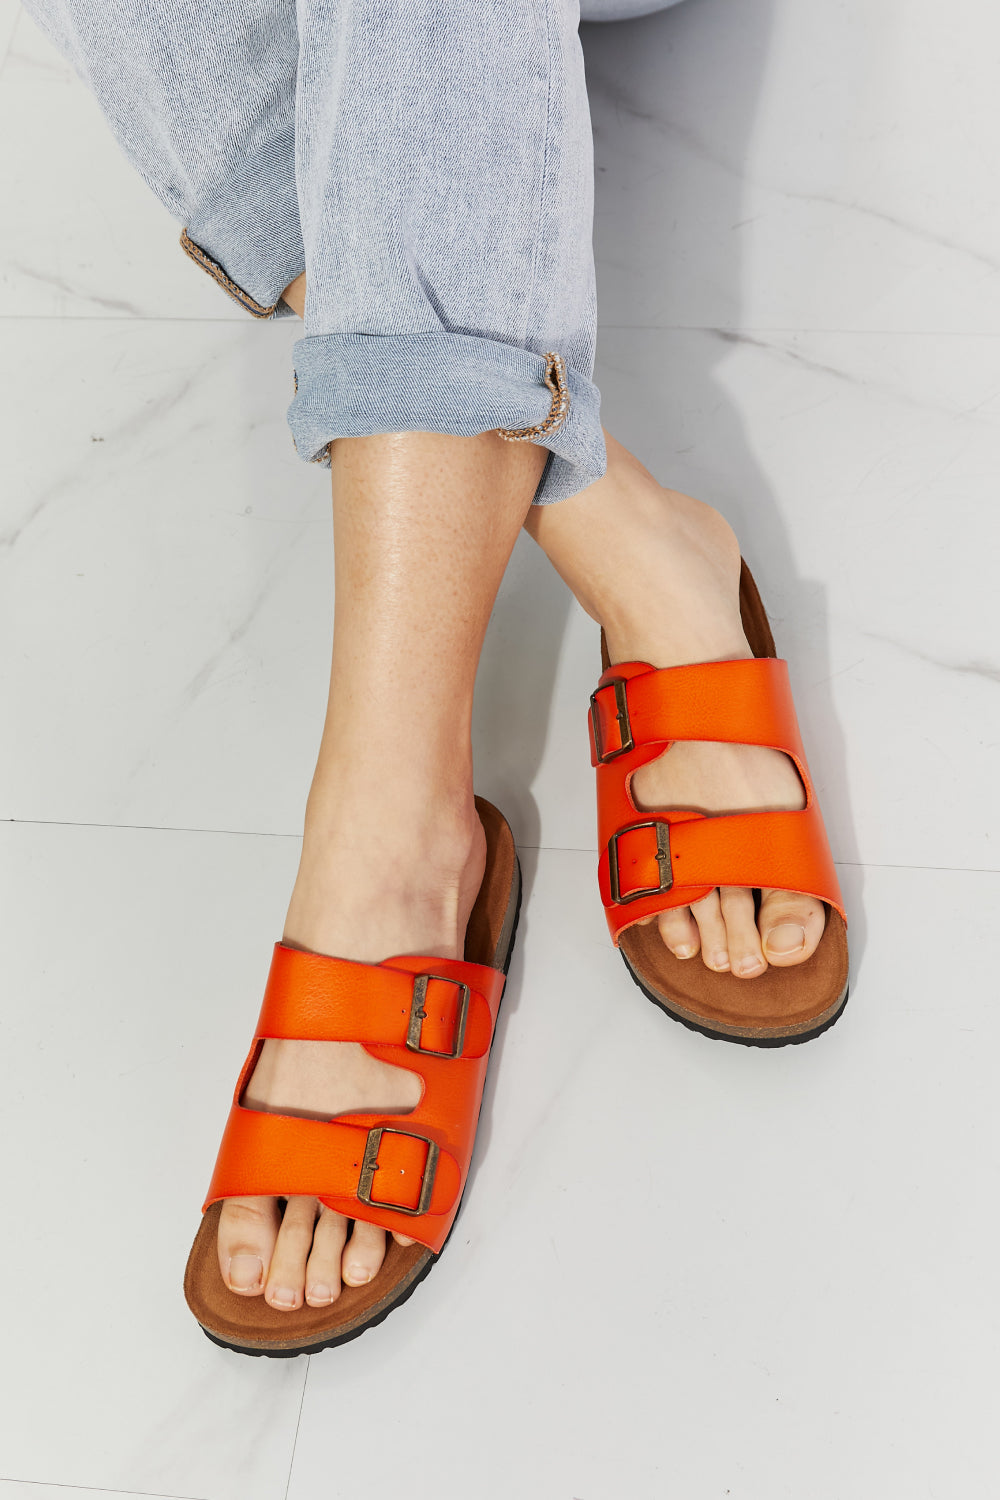 MMShoes Feeling Alive Double Banded Slide Sandals in Orange - Ships from The US - women's slides at TFC&H Co.